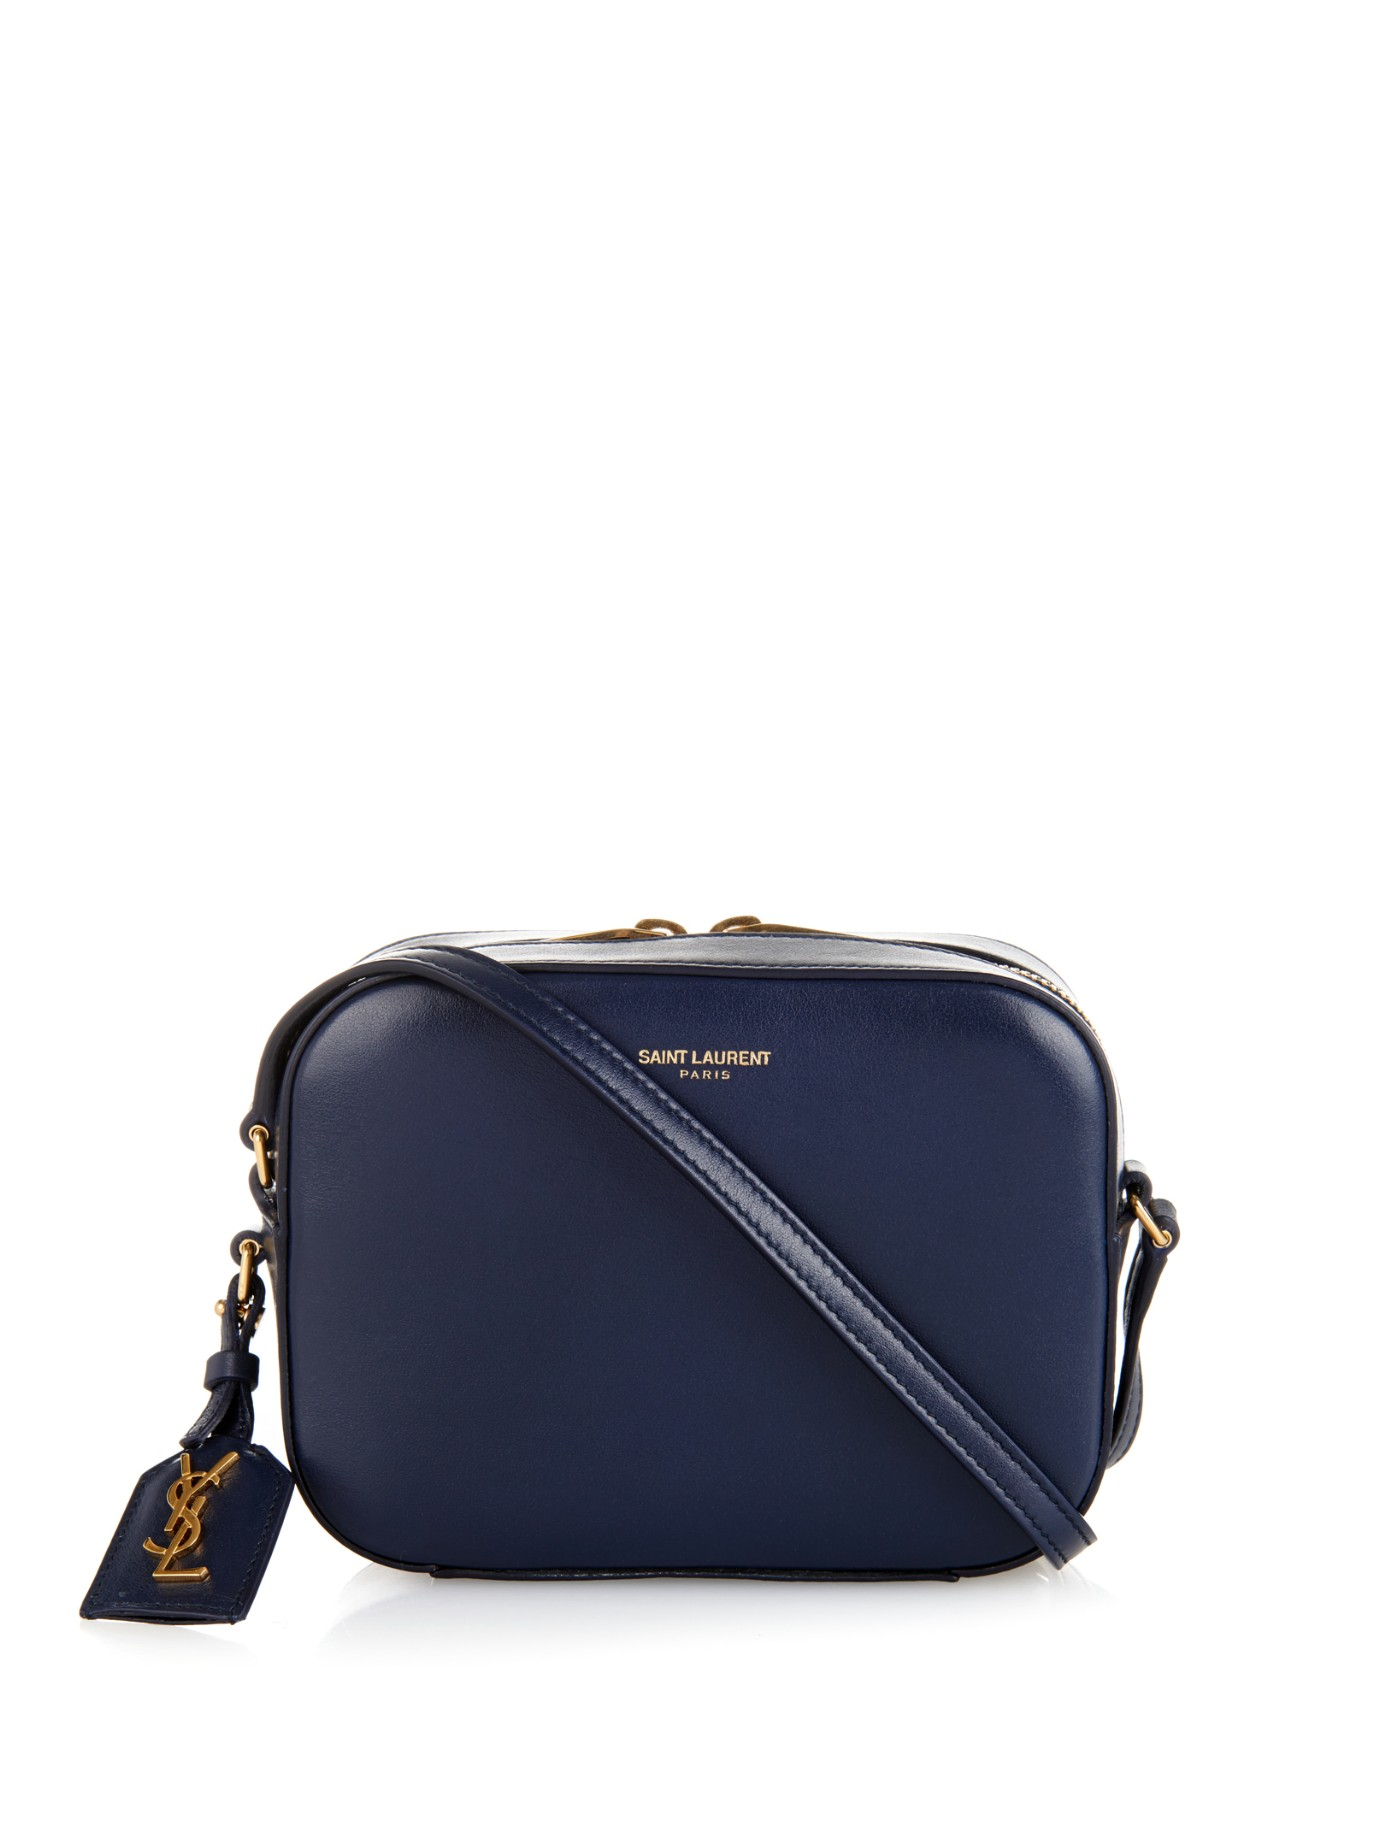 Saint Laurent Small Leather Camera Bag in Navy (Blue) - Lyst